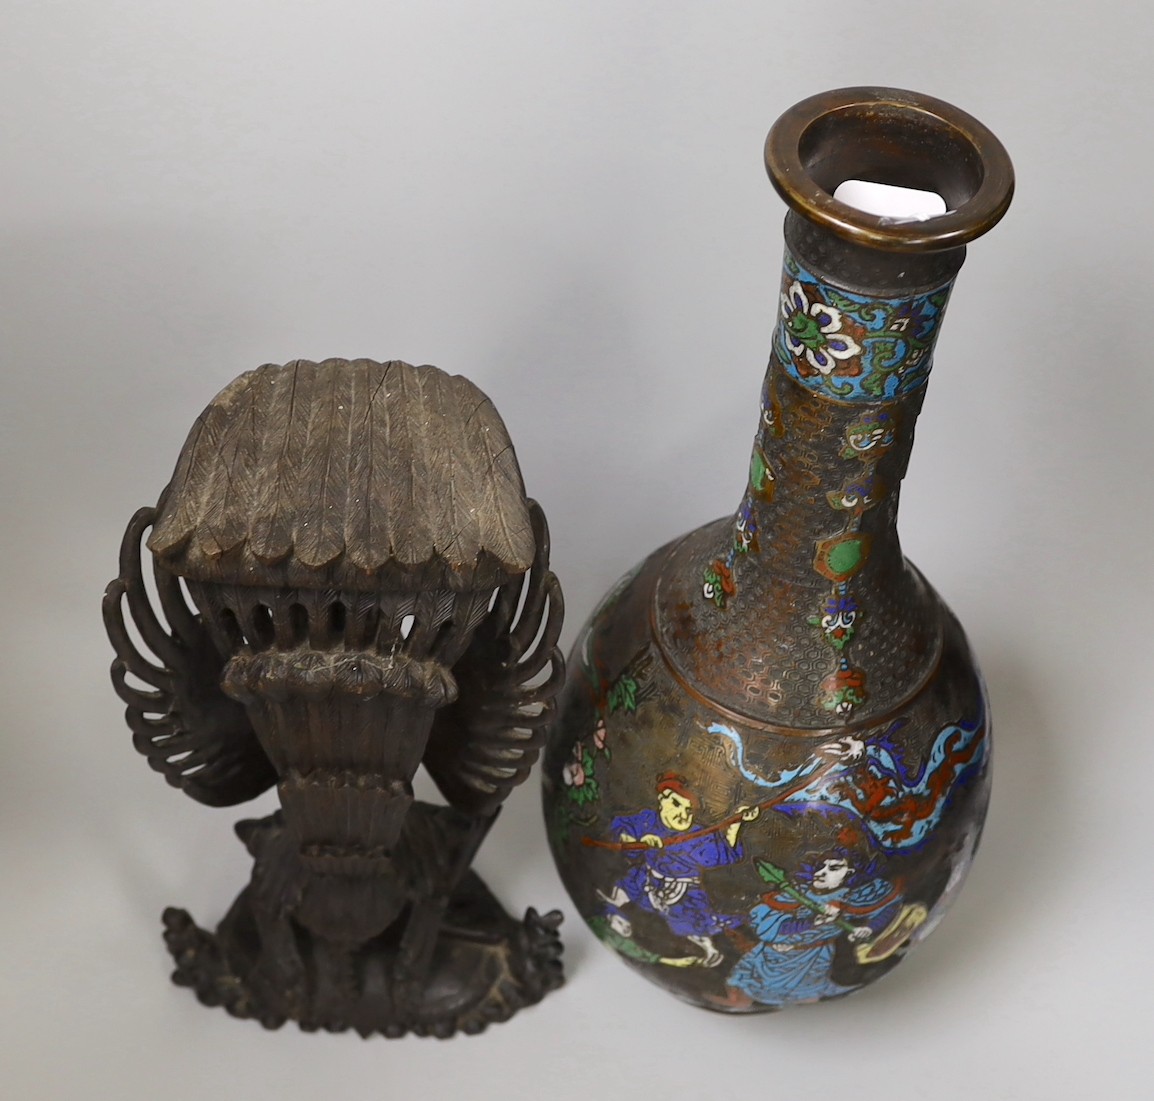 A large Japanese enamelled bronze vase and a Balinese wood carving. Tallest 44cm